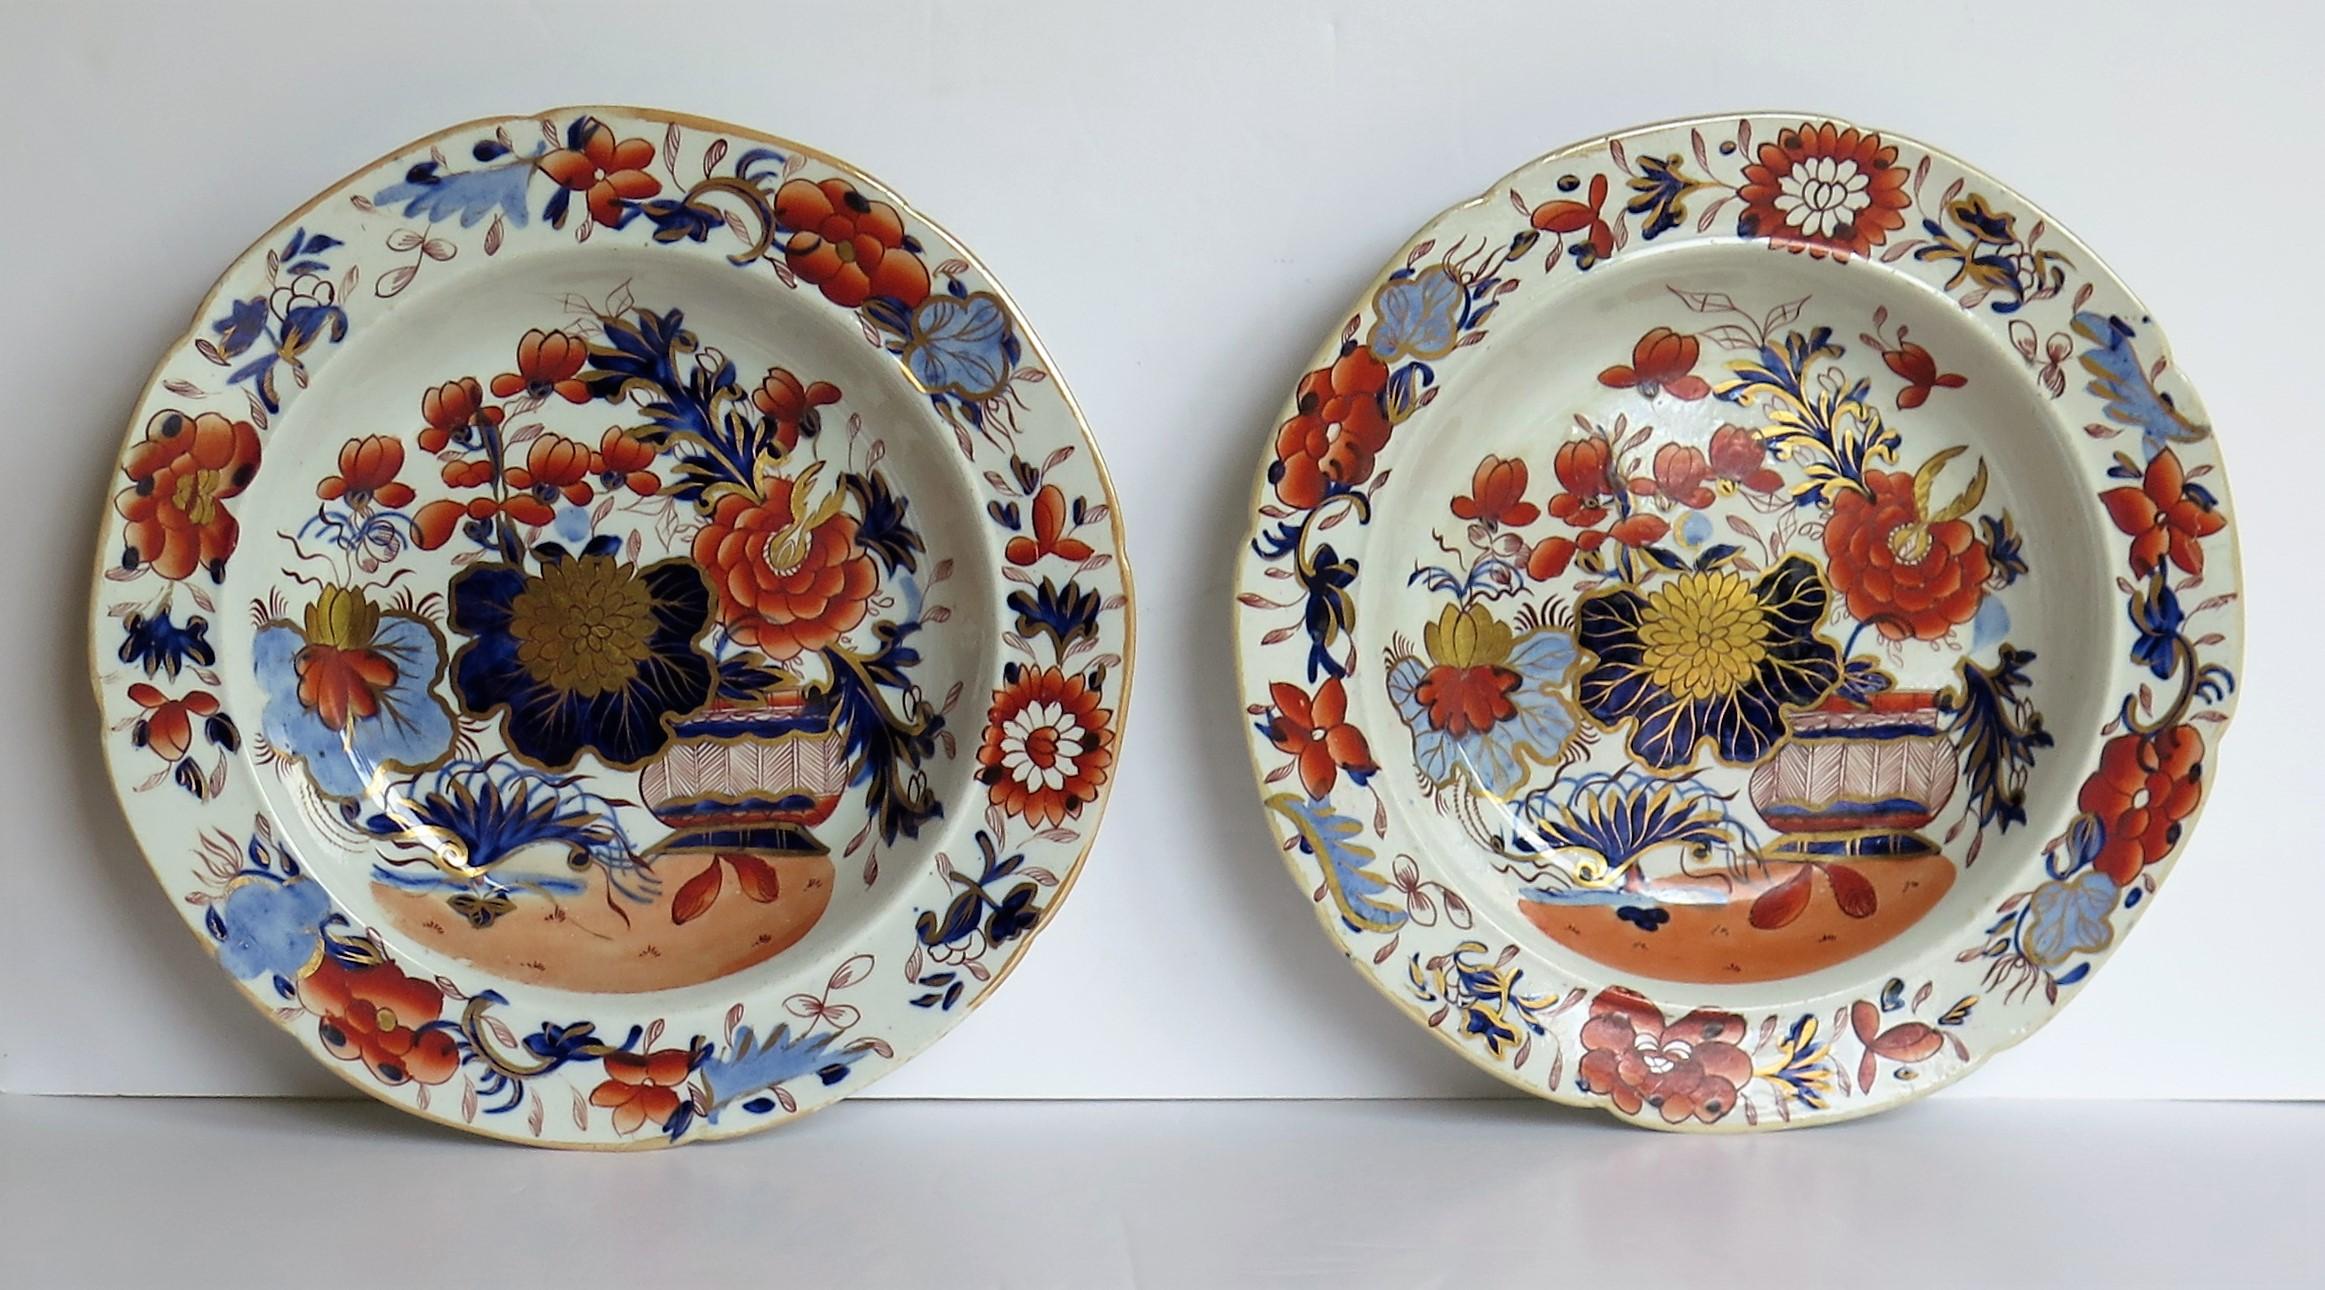 This is a very fine early pair of Mason's Ironstone pottery soup bowls or deep plates, hand painted in the very decorative gilded basket Japan pattern, produced by the Mason's factory at Lane Delph, Staffordshire, England, in the George 111rd